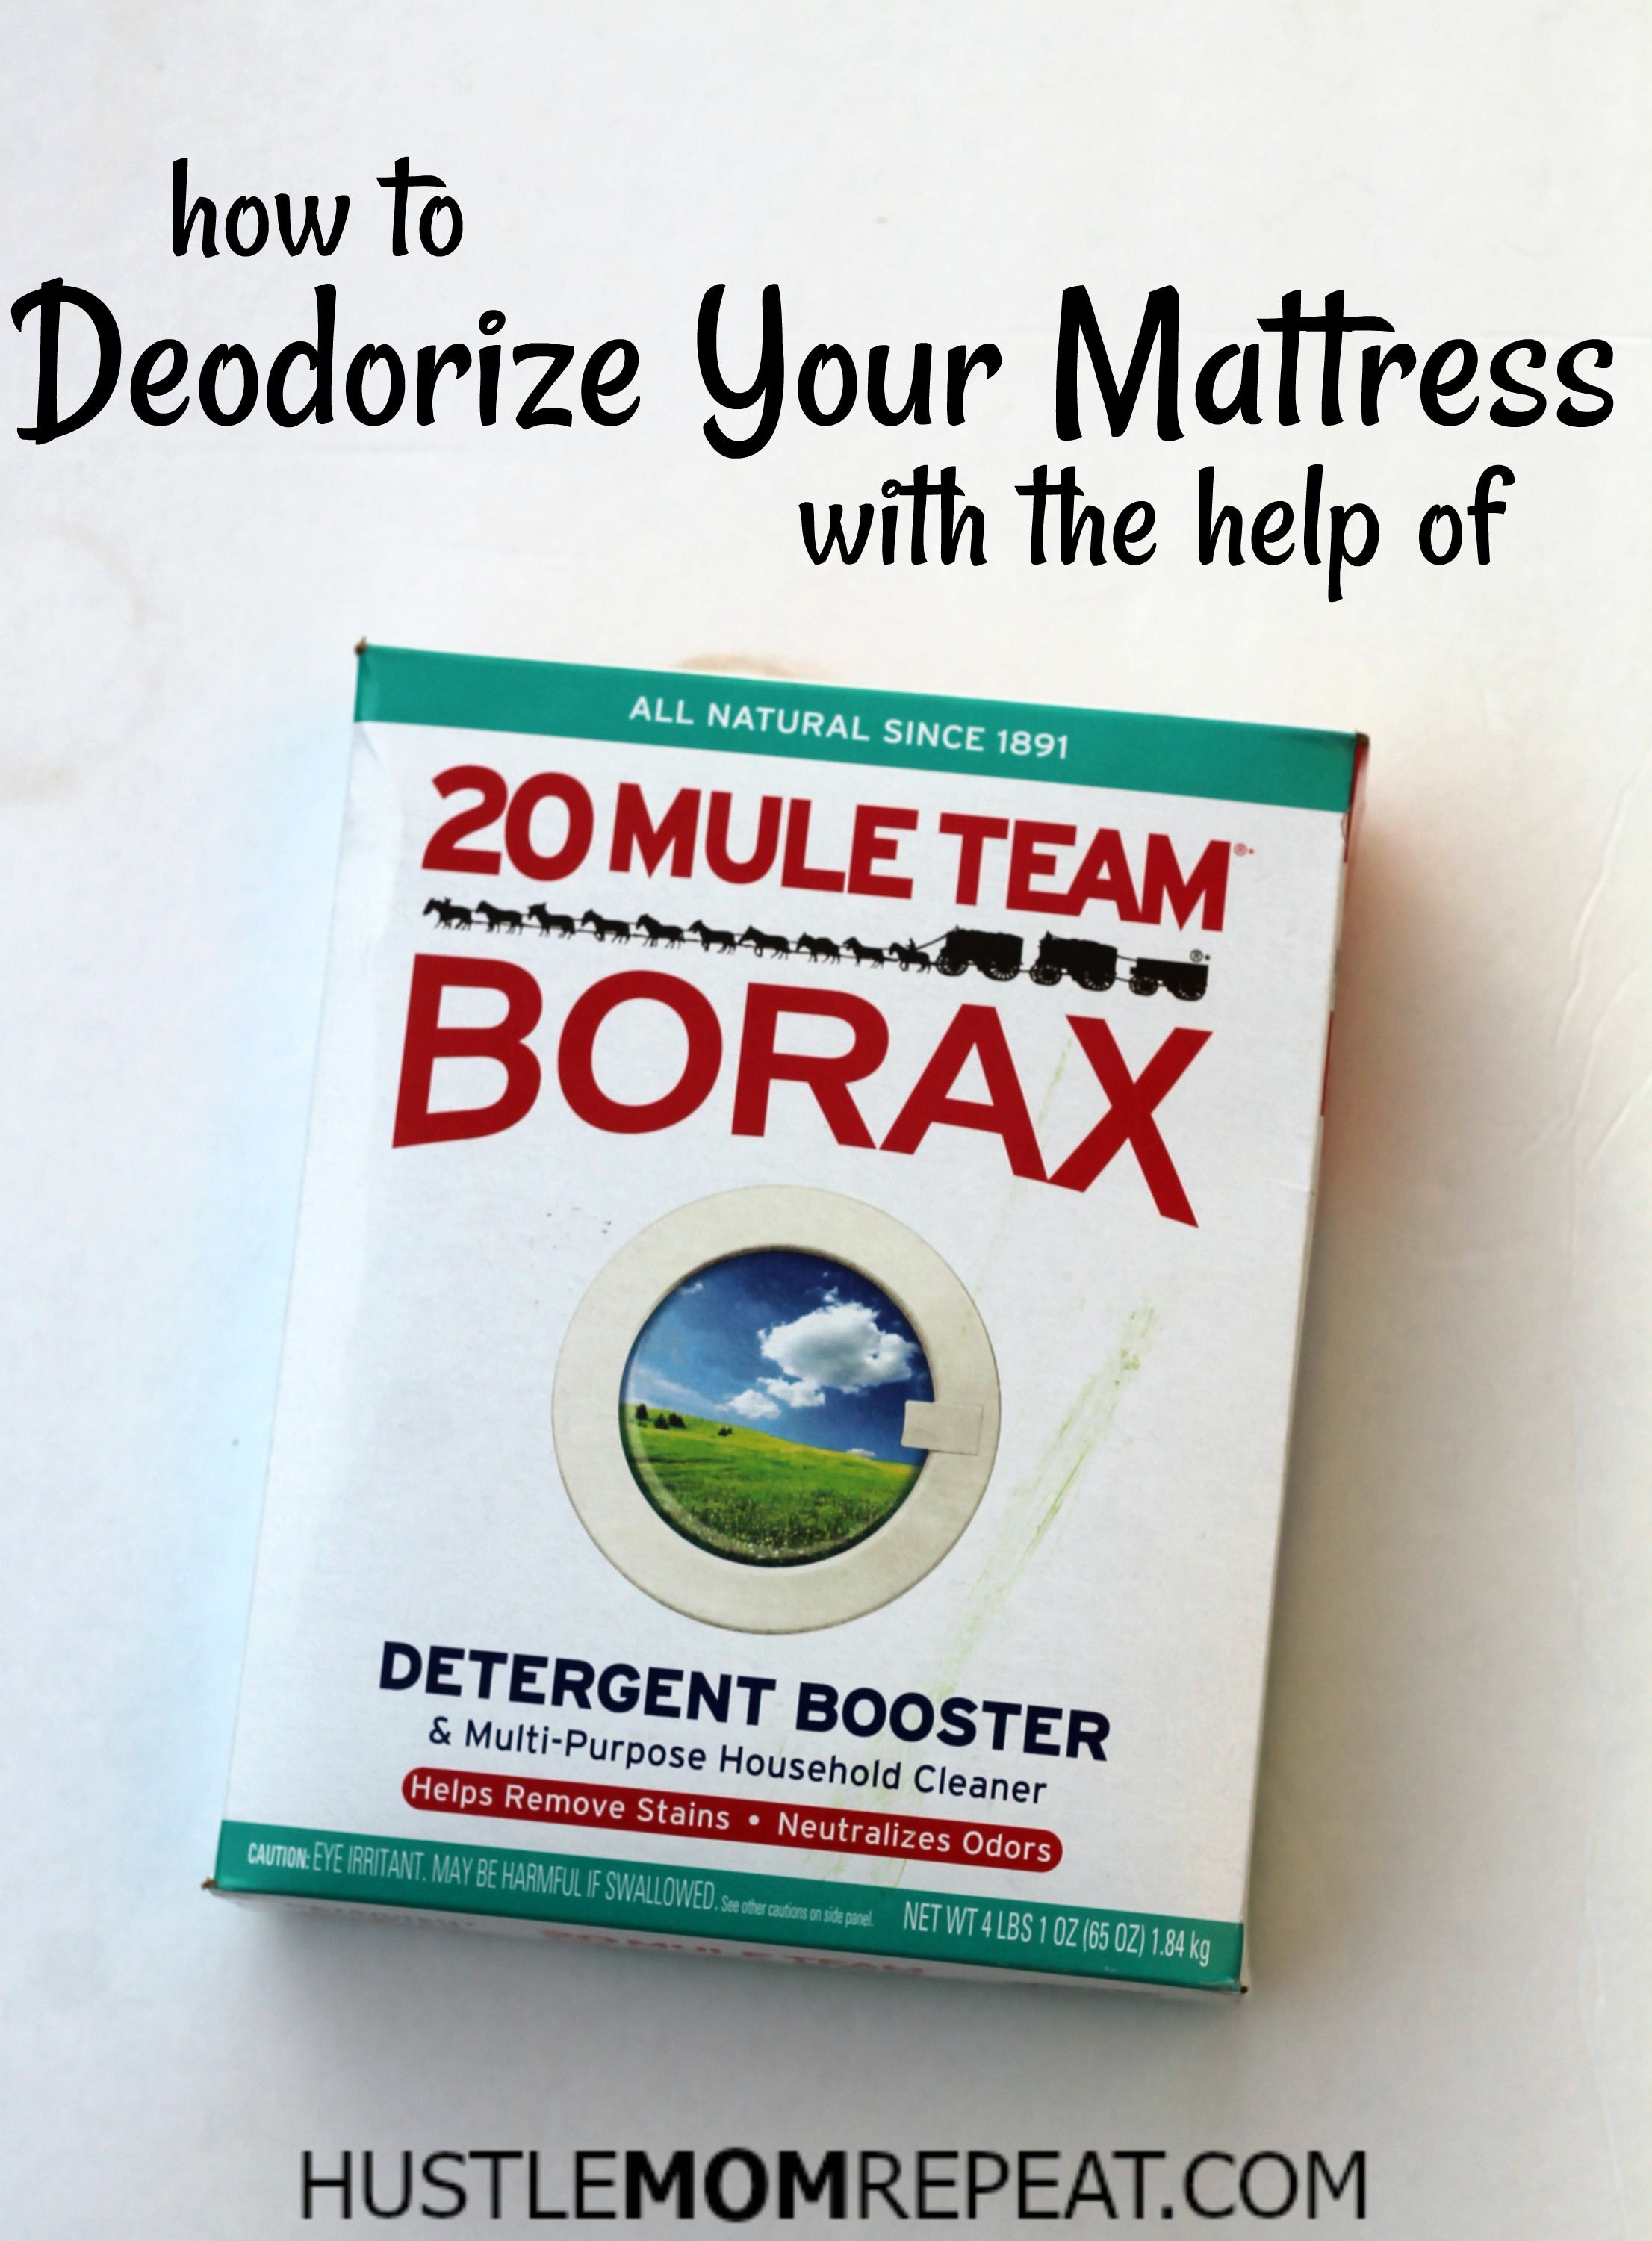 What Is Borax?